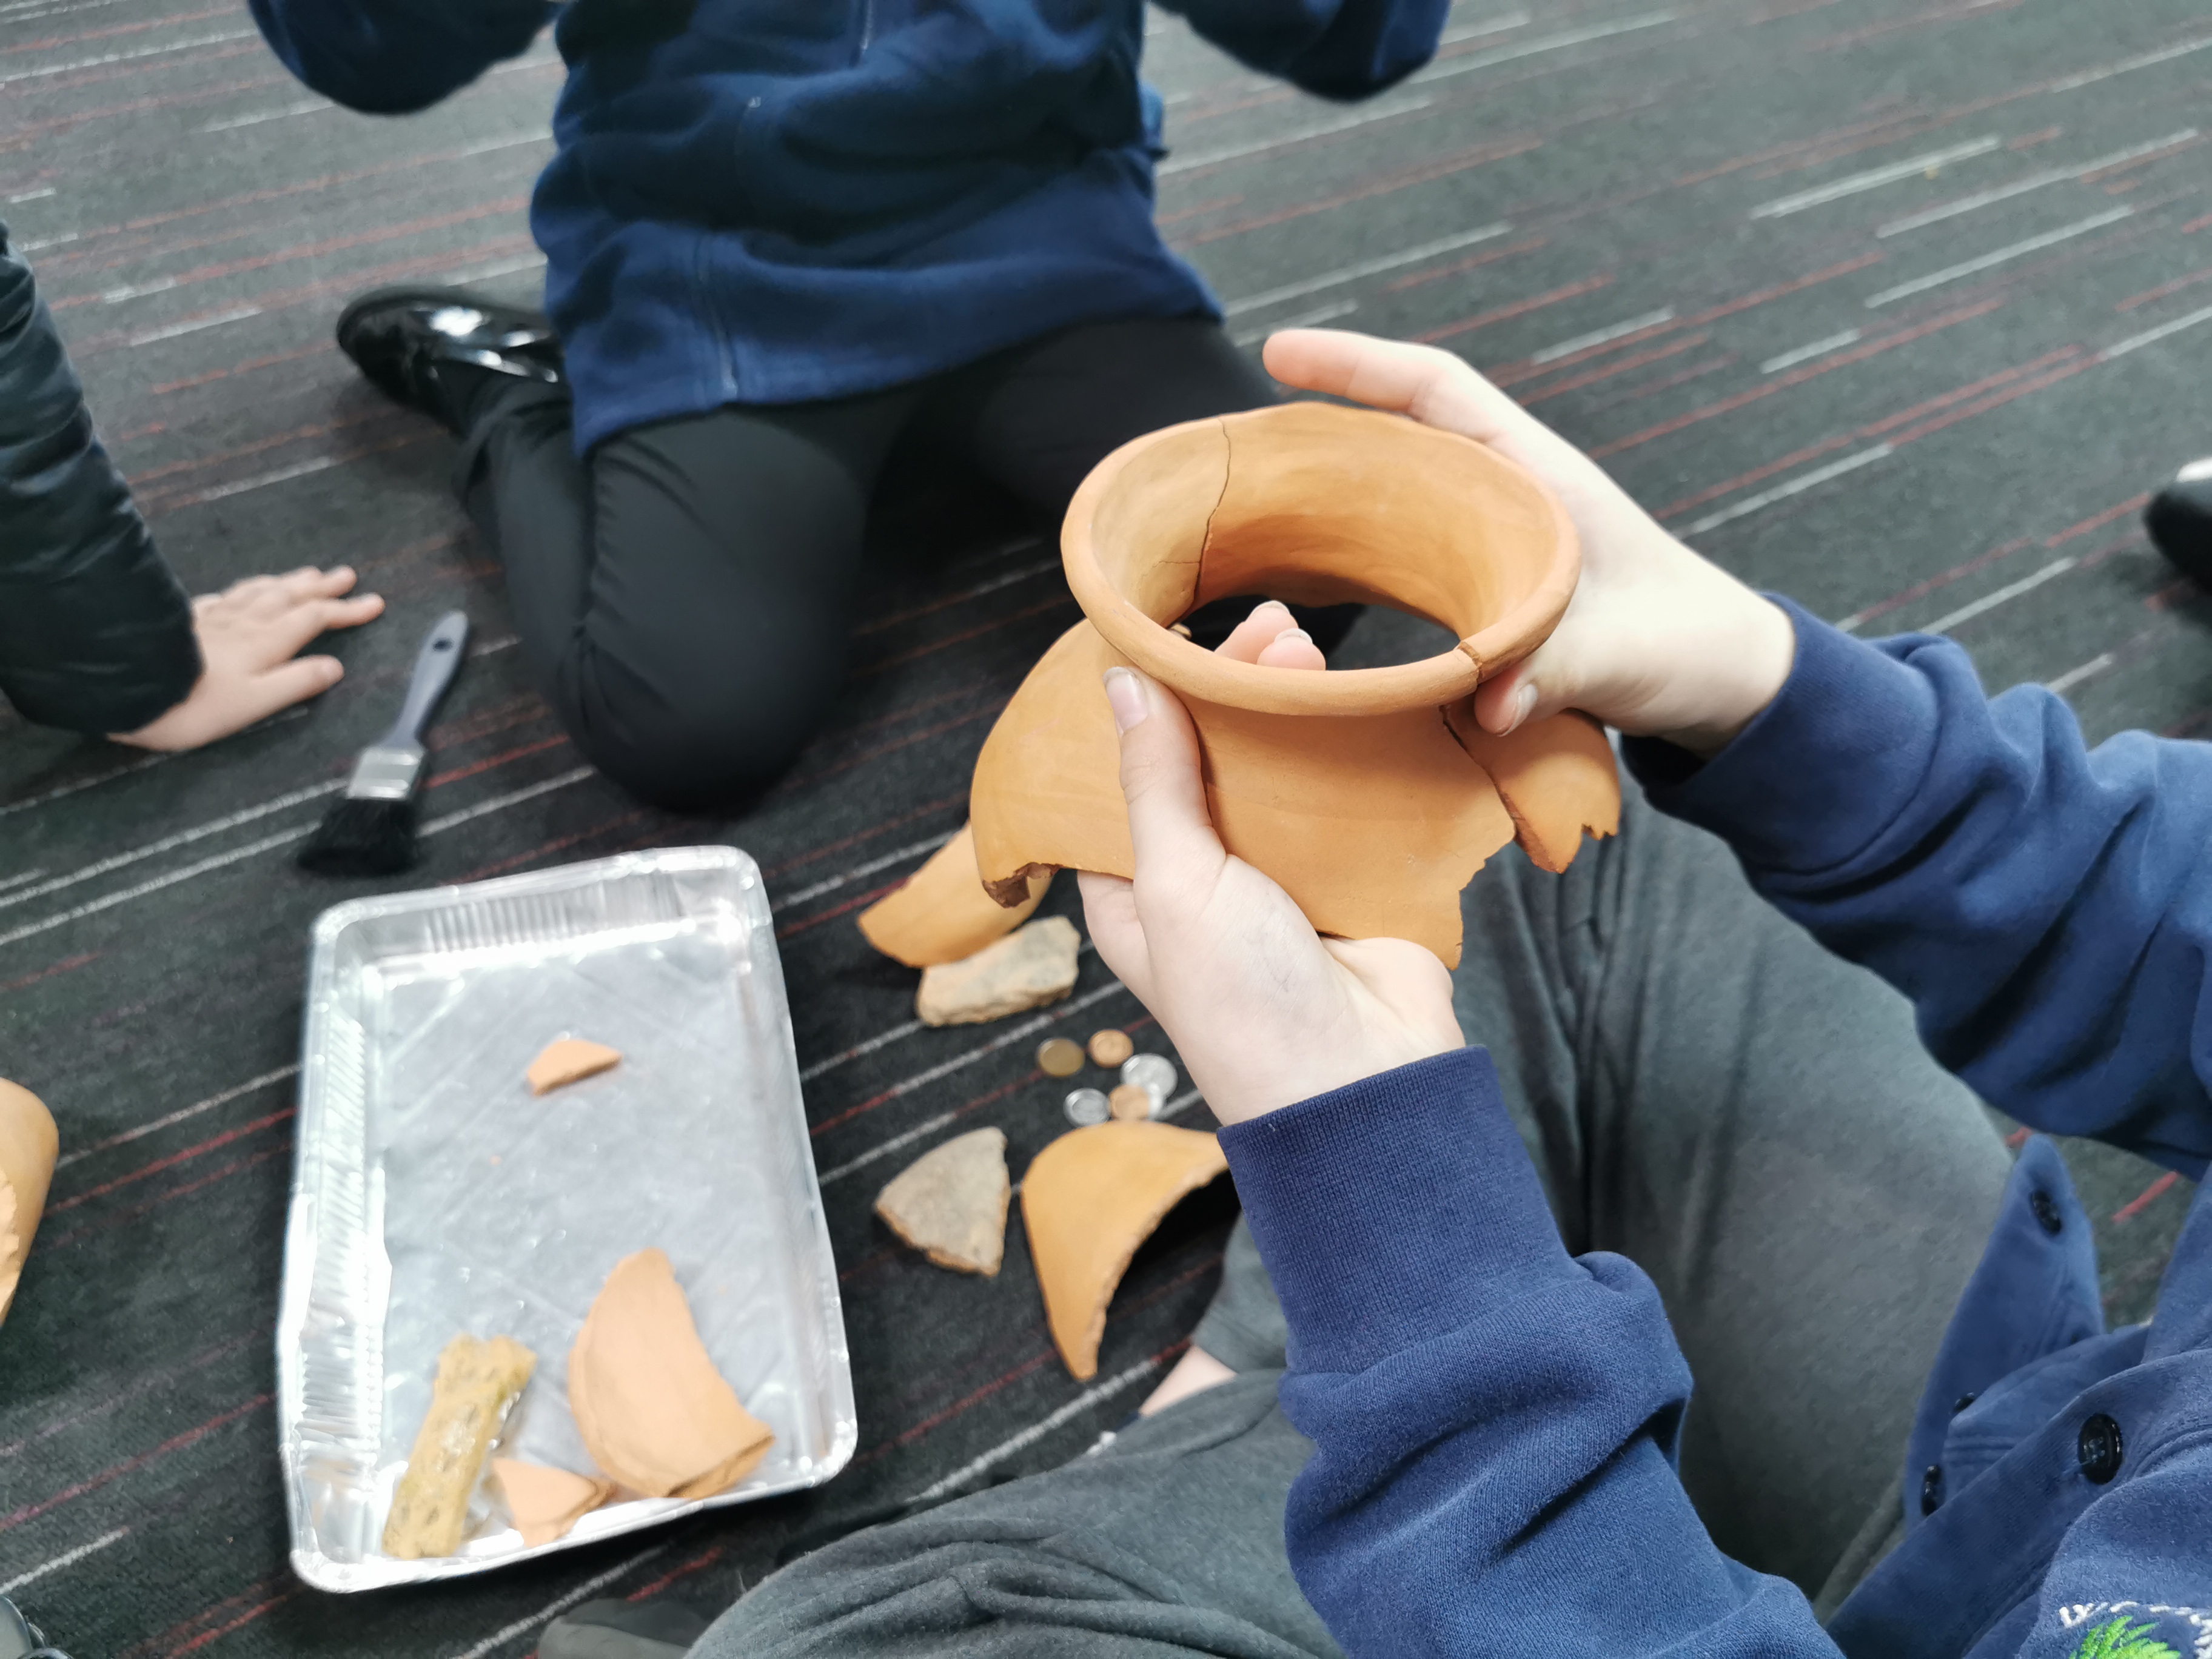 Students putting together the pottery pieces they excavated from the dig boxes.